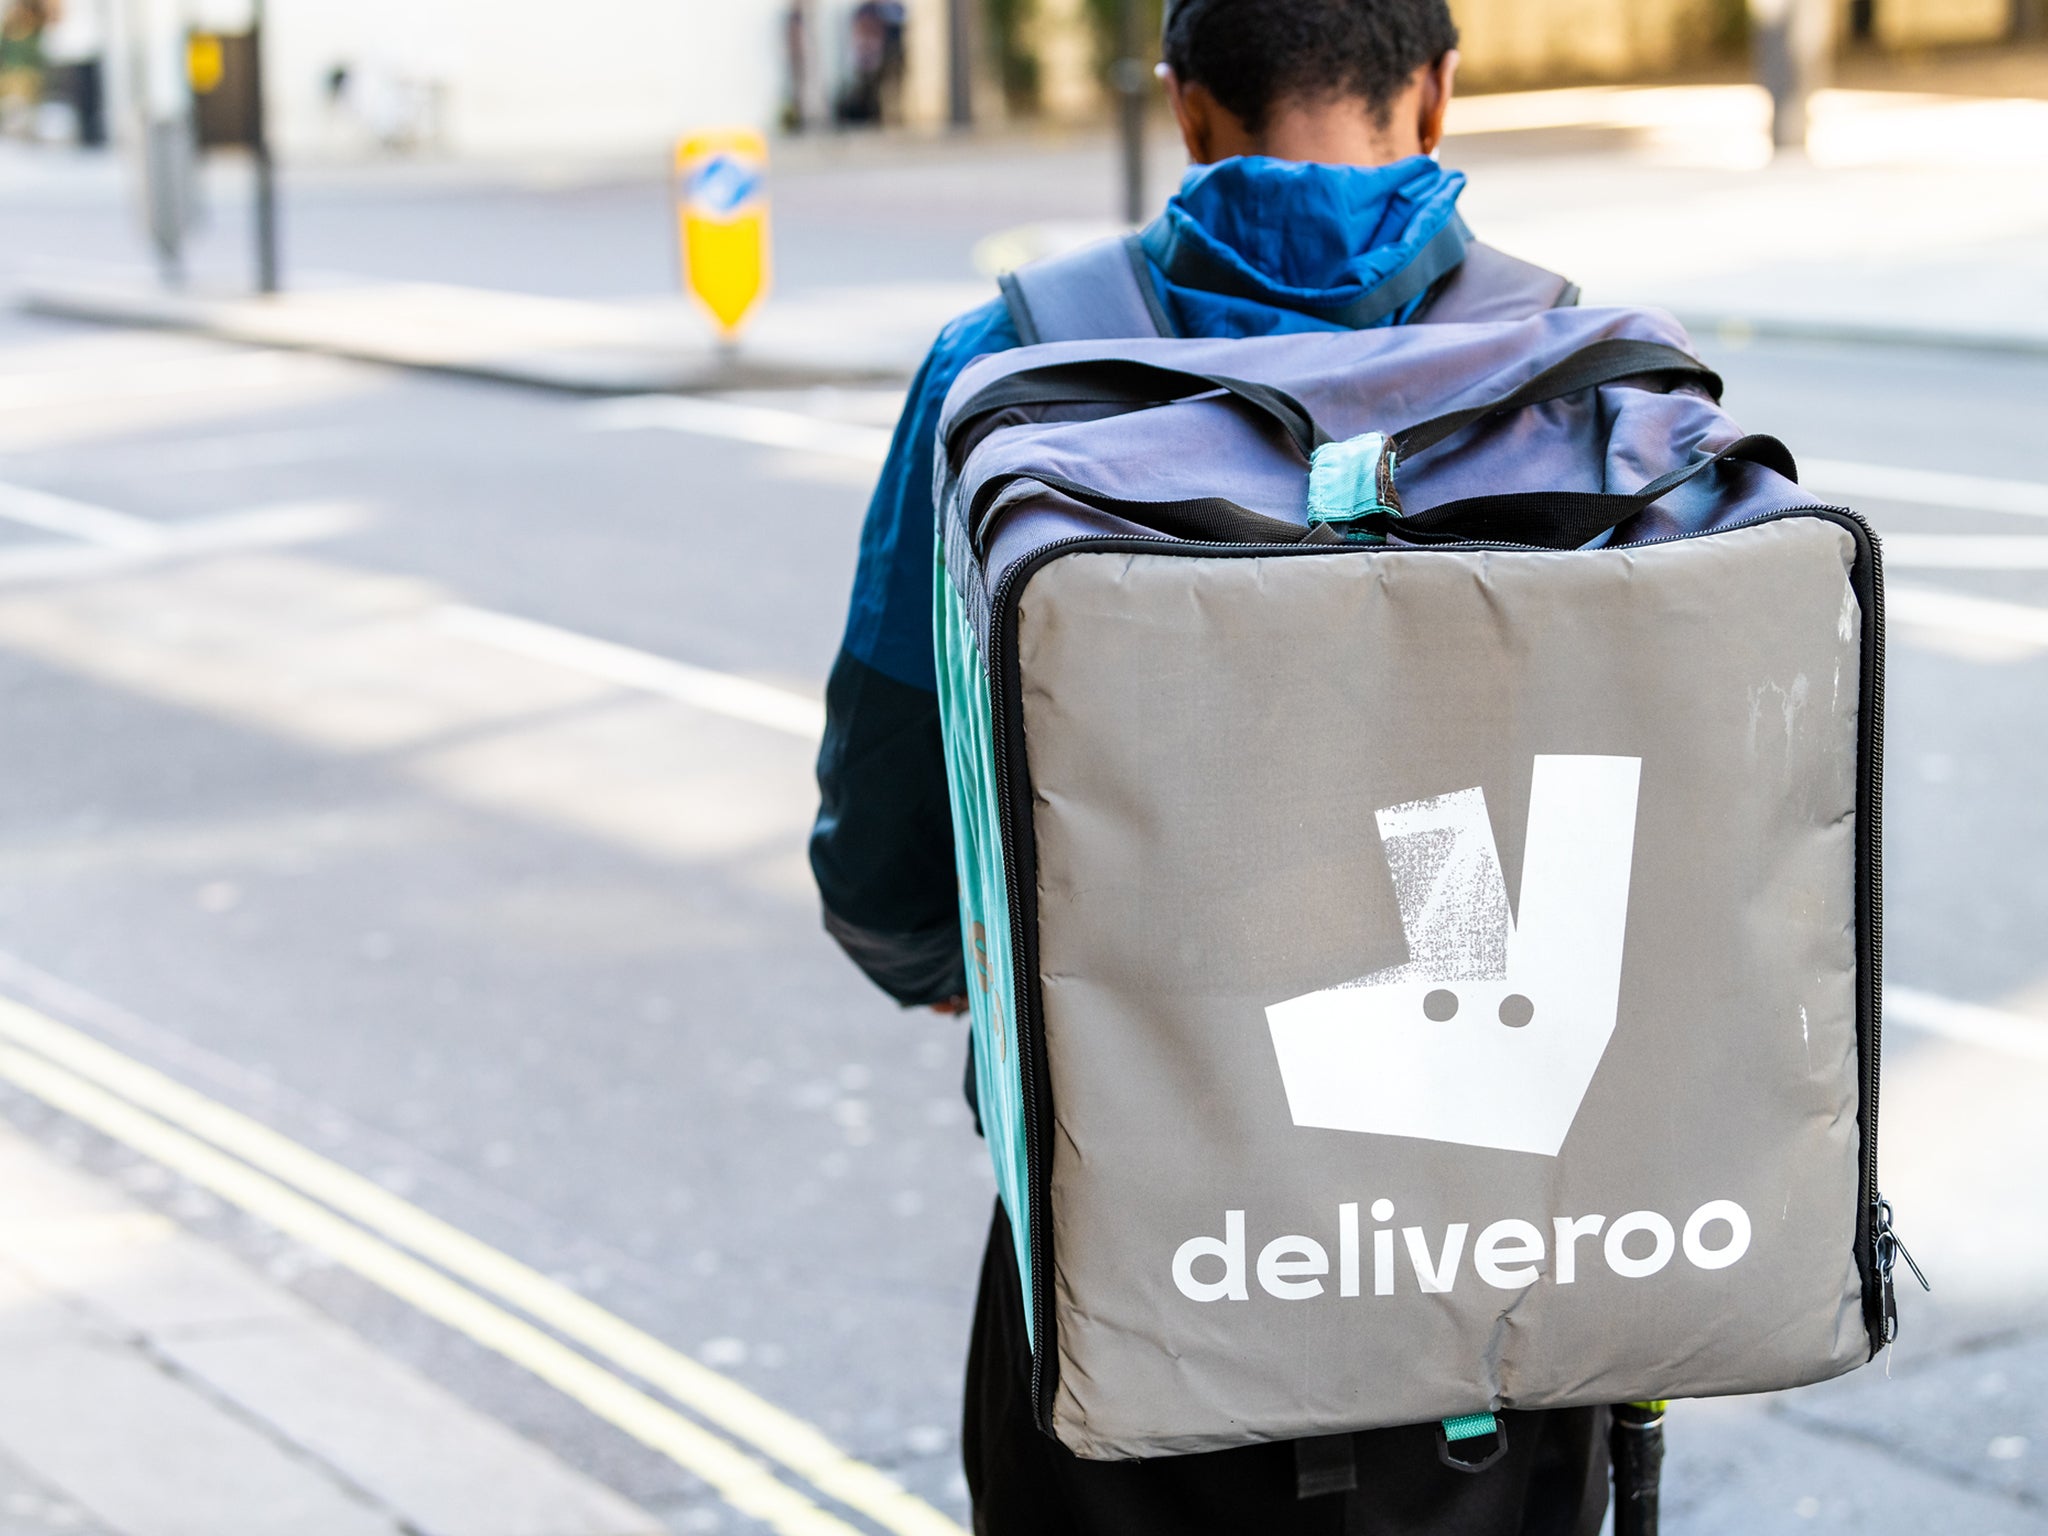 LloydsPharmacy and Deliveroo launch partnership to deliver medication to your door within 30 minutes